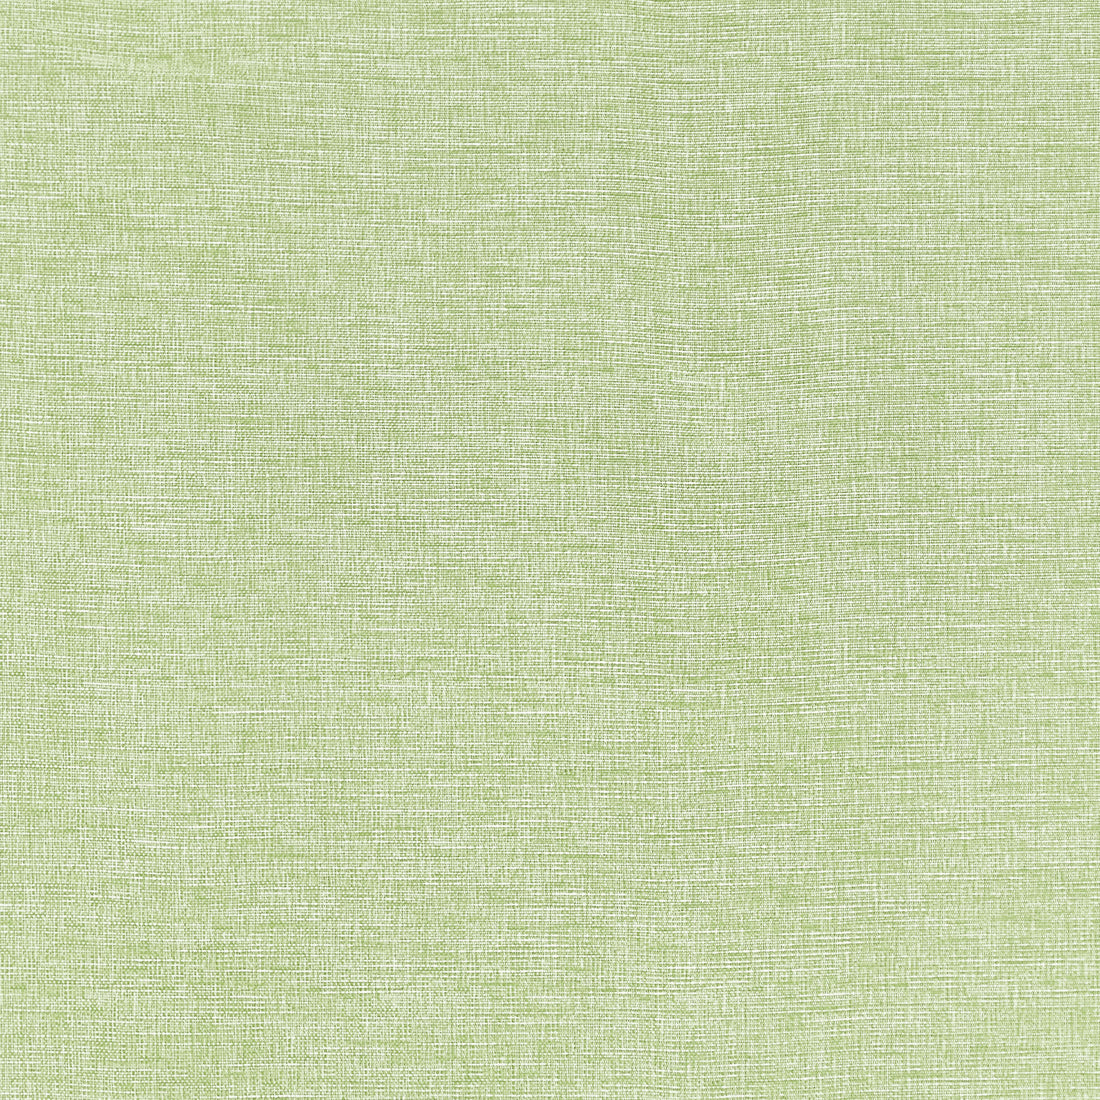 Finley fabric in willow color - pattern number W81609 - by Thibaut in the Locale collection